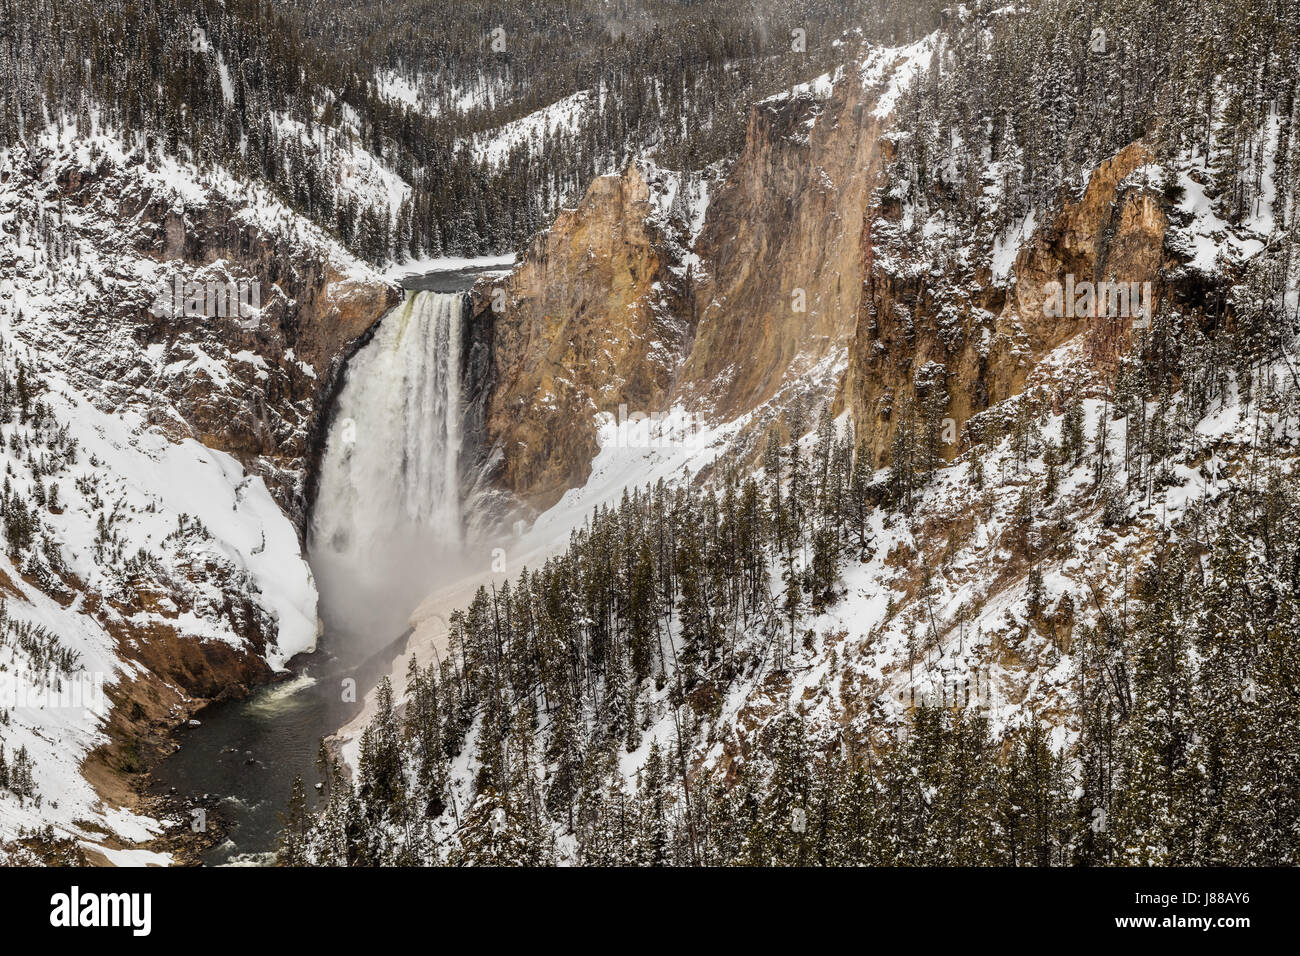 A late spring snow dusts the hills around the Lower Falls of the Yellowstone River as it crashes into the canyon below at Yellowstone National Park April 28, 2017 in Yellowstone, Wyoming. The Lower Yellowstone Falls is the largest volume waterfall in the Rocky Mountains of the United States. Stock Photo